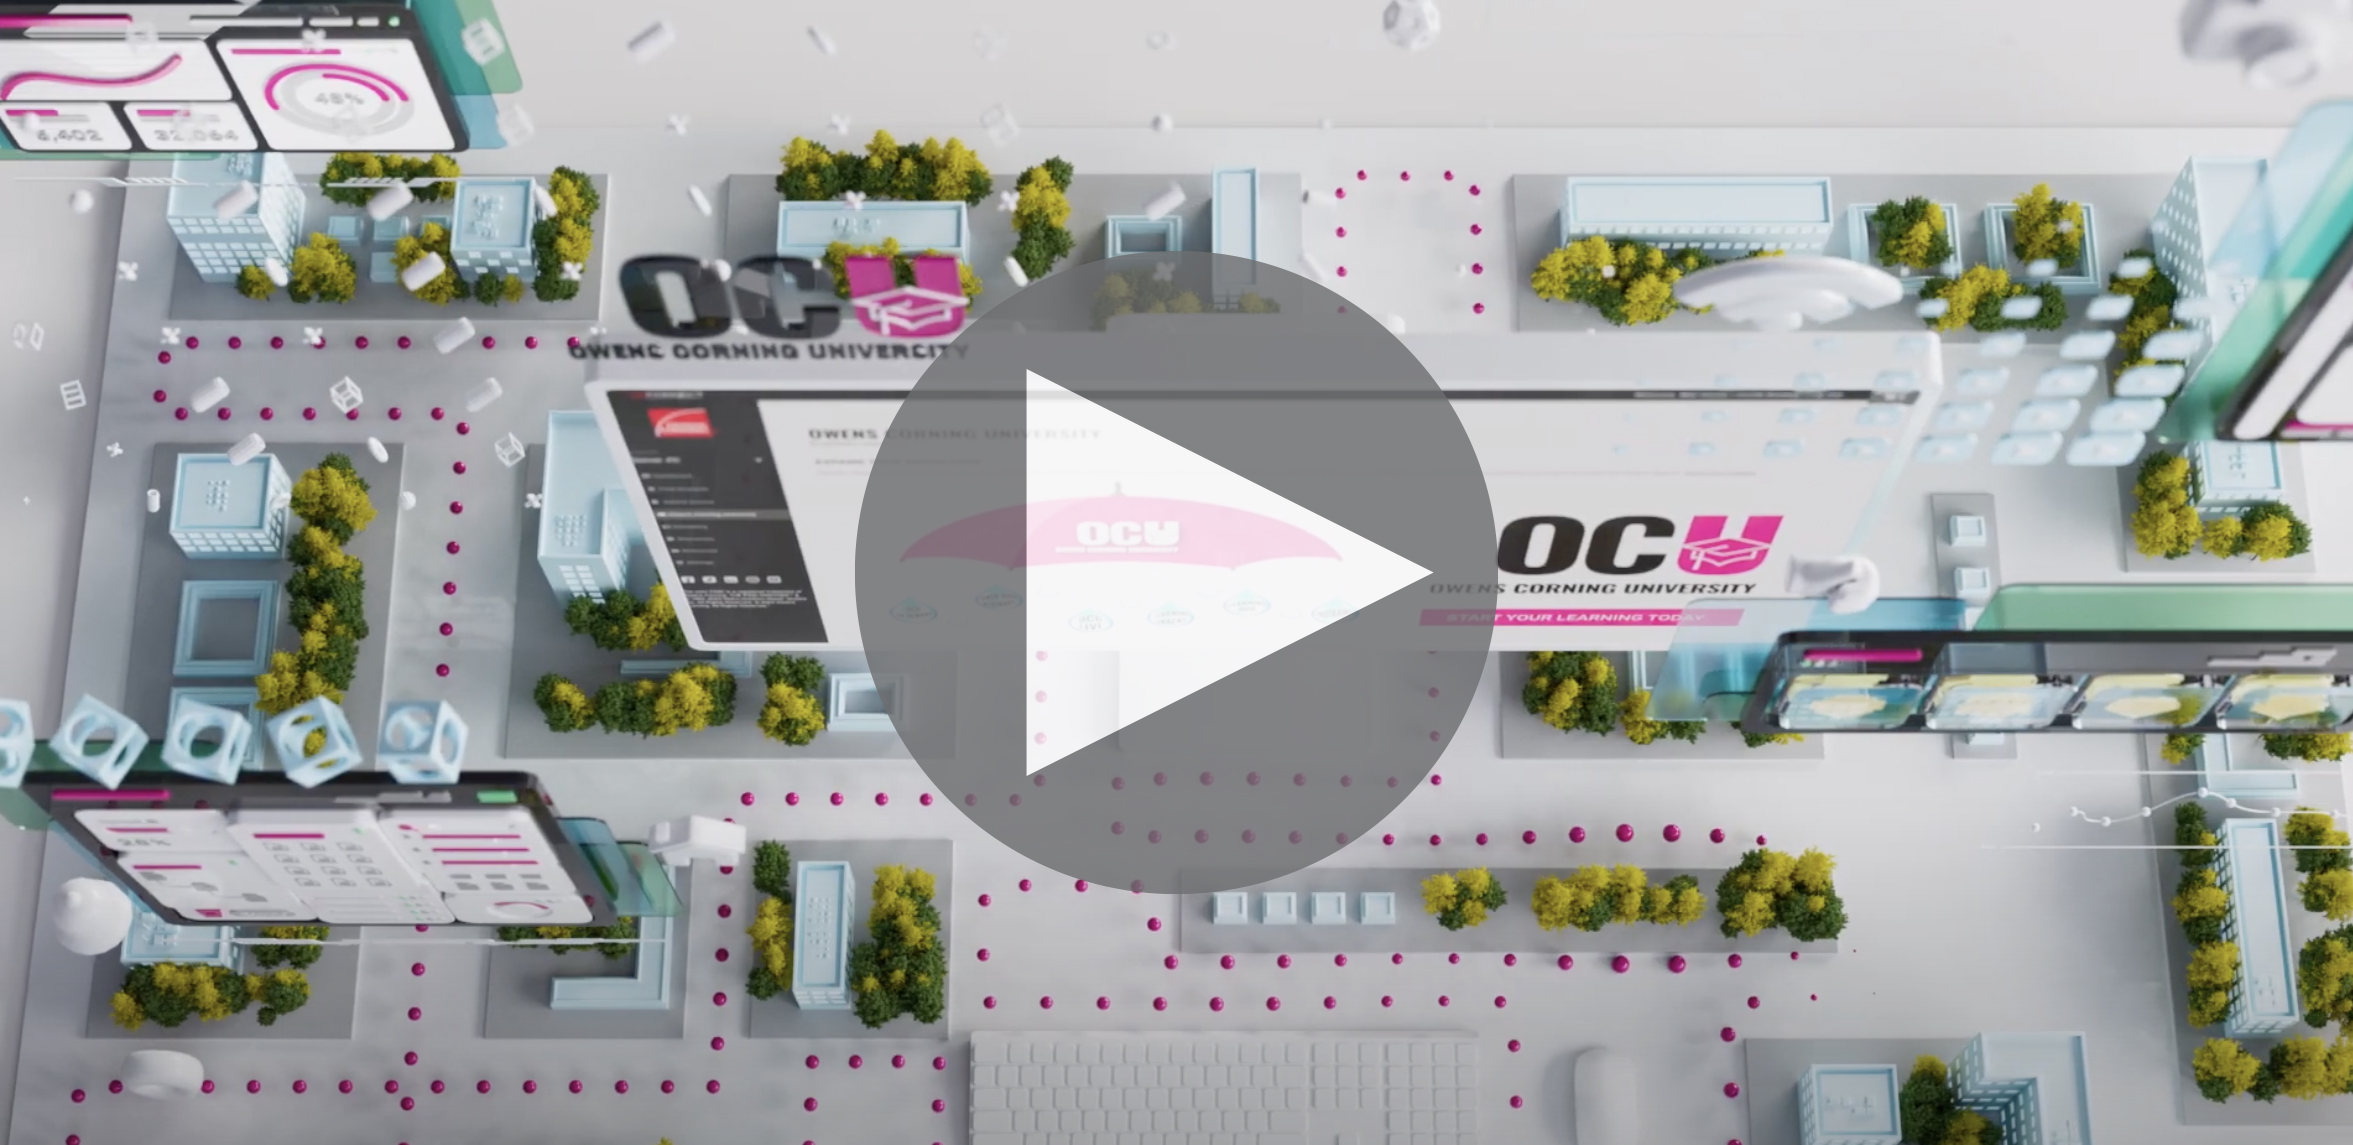 Click to watch a video detailing the new Owens Corning University